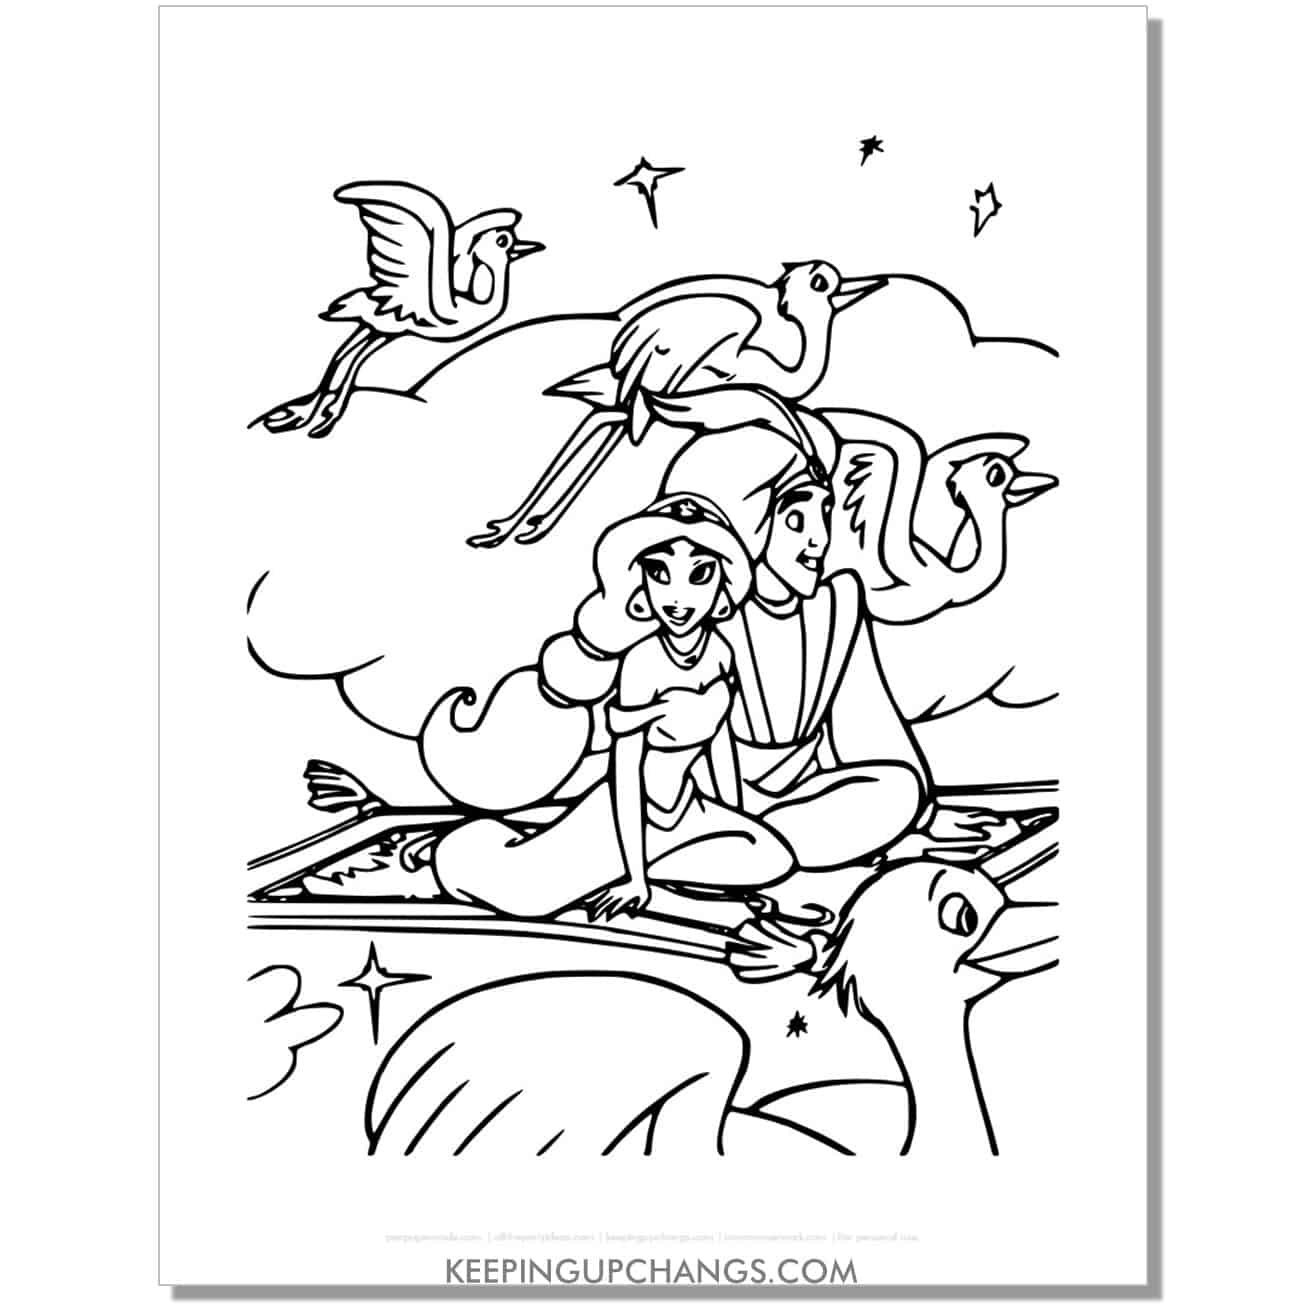 jasmine, aladdin among birds in sky coloring page, sheet.